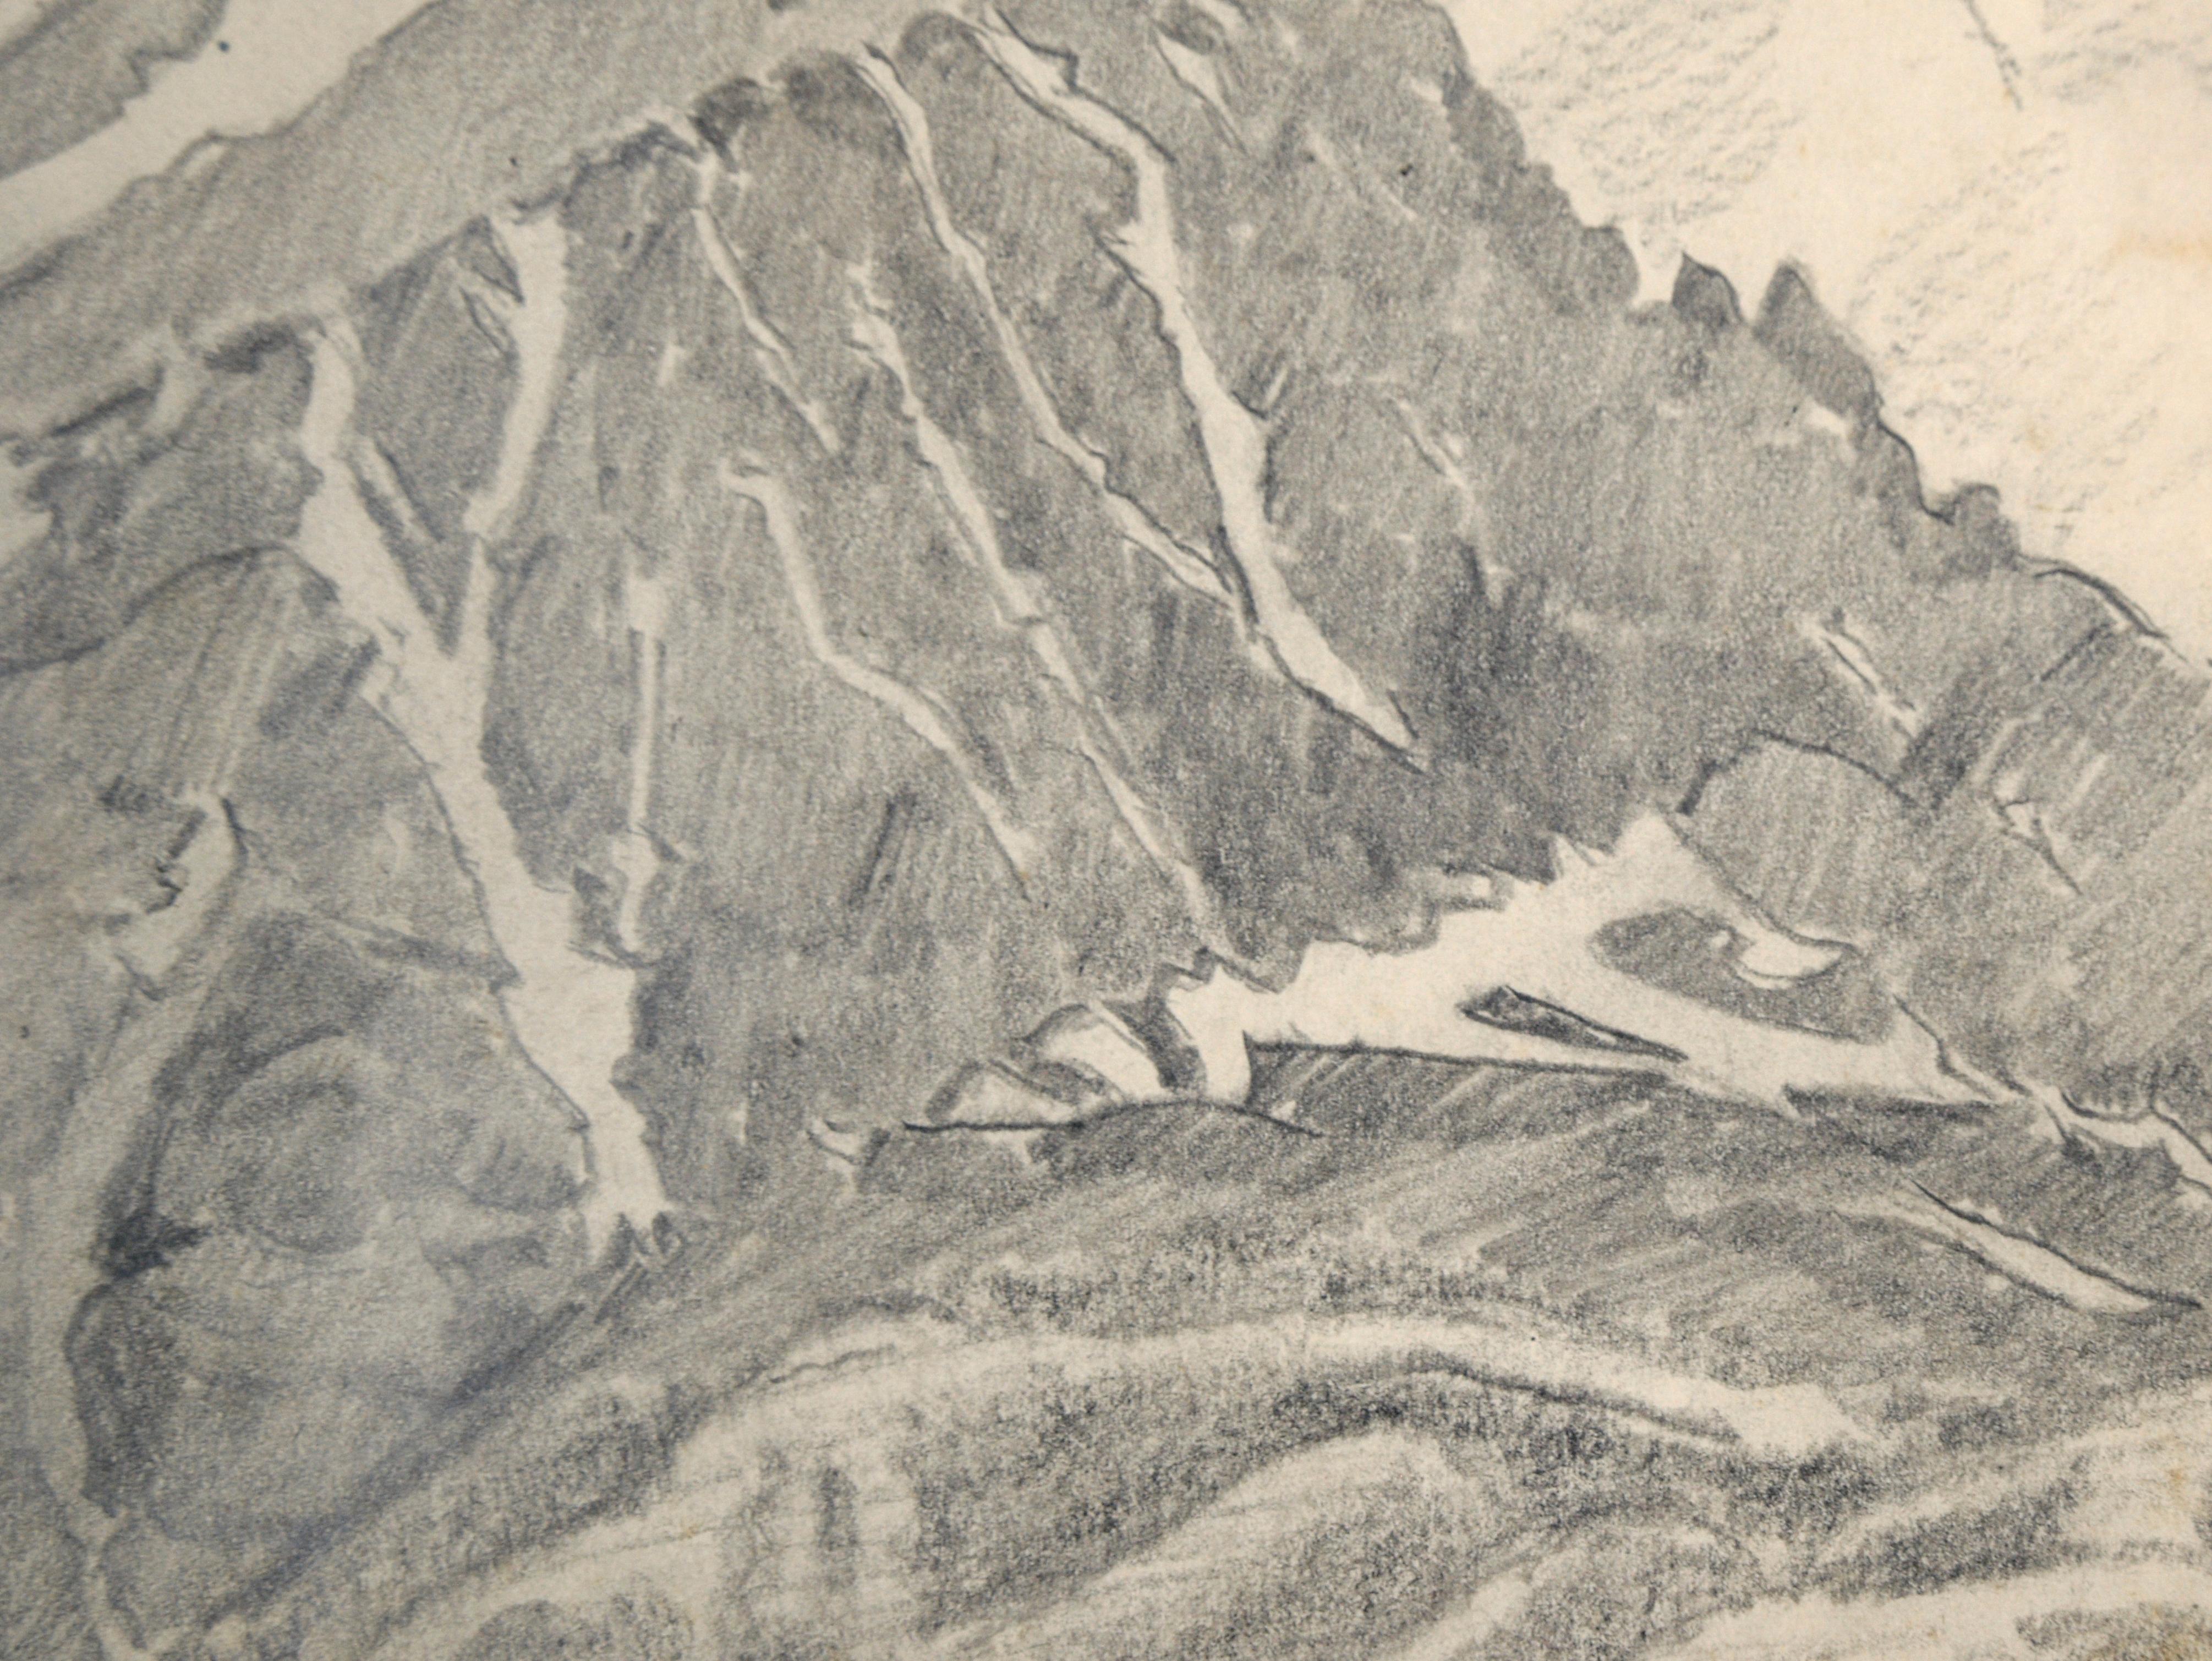 San Gabriel Mountain Landscape in Black and White - Graphite Pencil on Paper - American Impressionist Art by Ralph Holmes